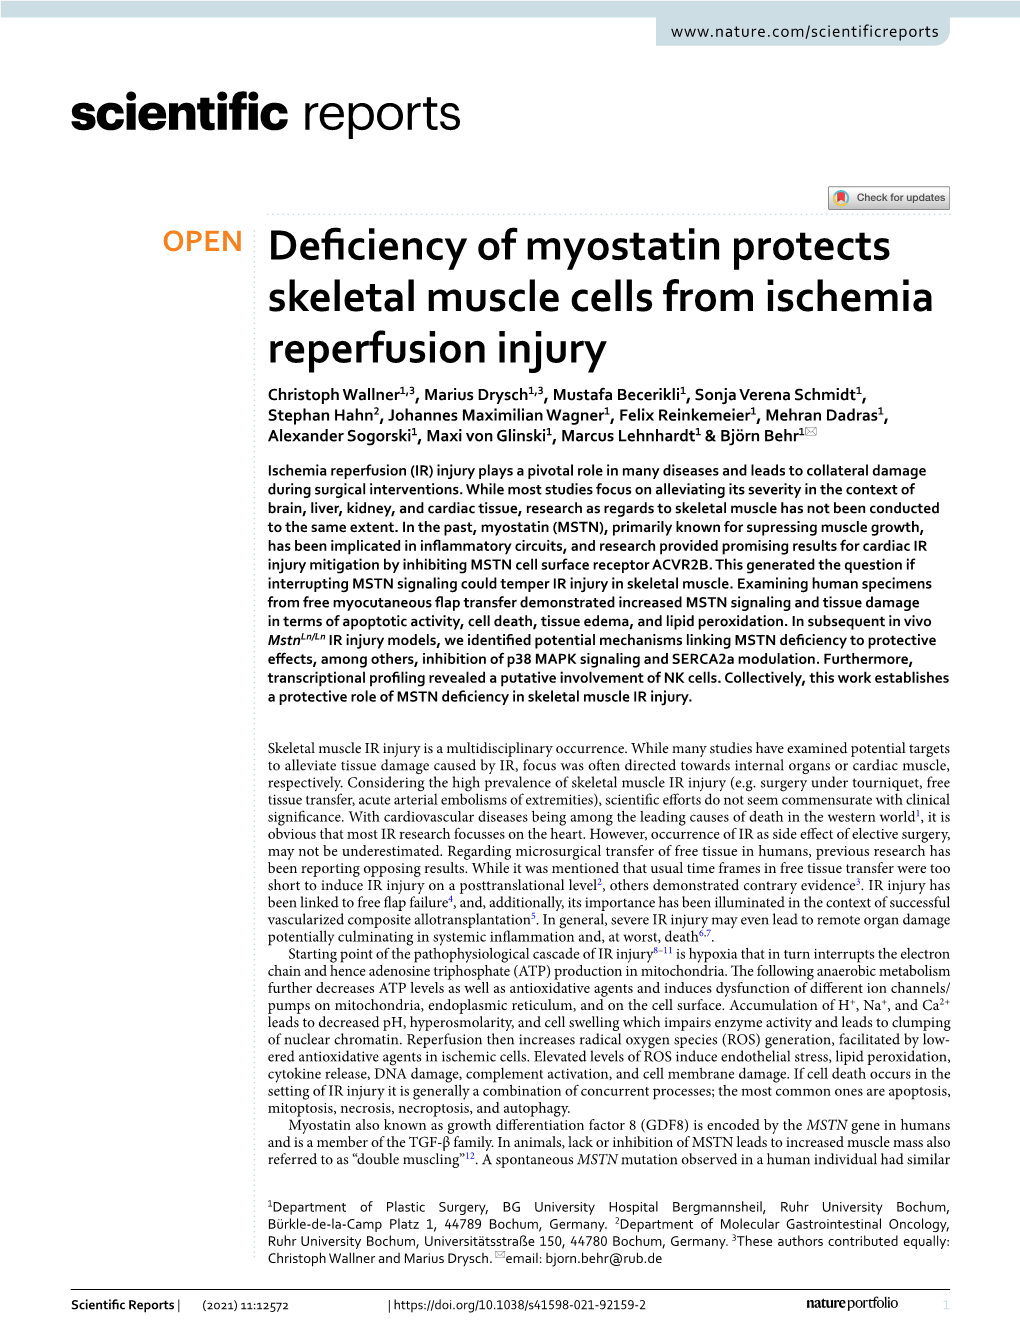 Deficiency of Myostatin Protects Skeletal Muscle Cells from Ischemia